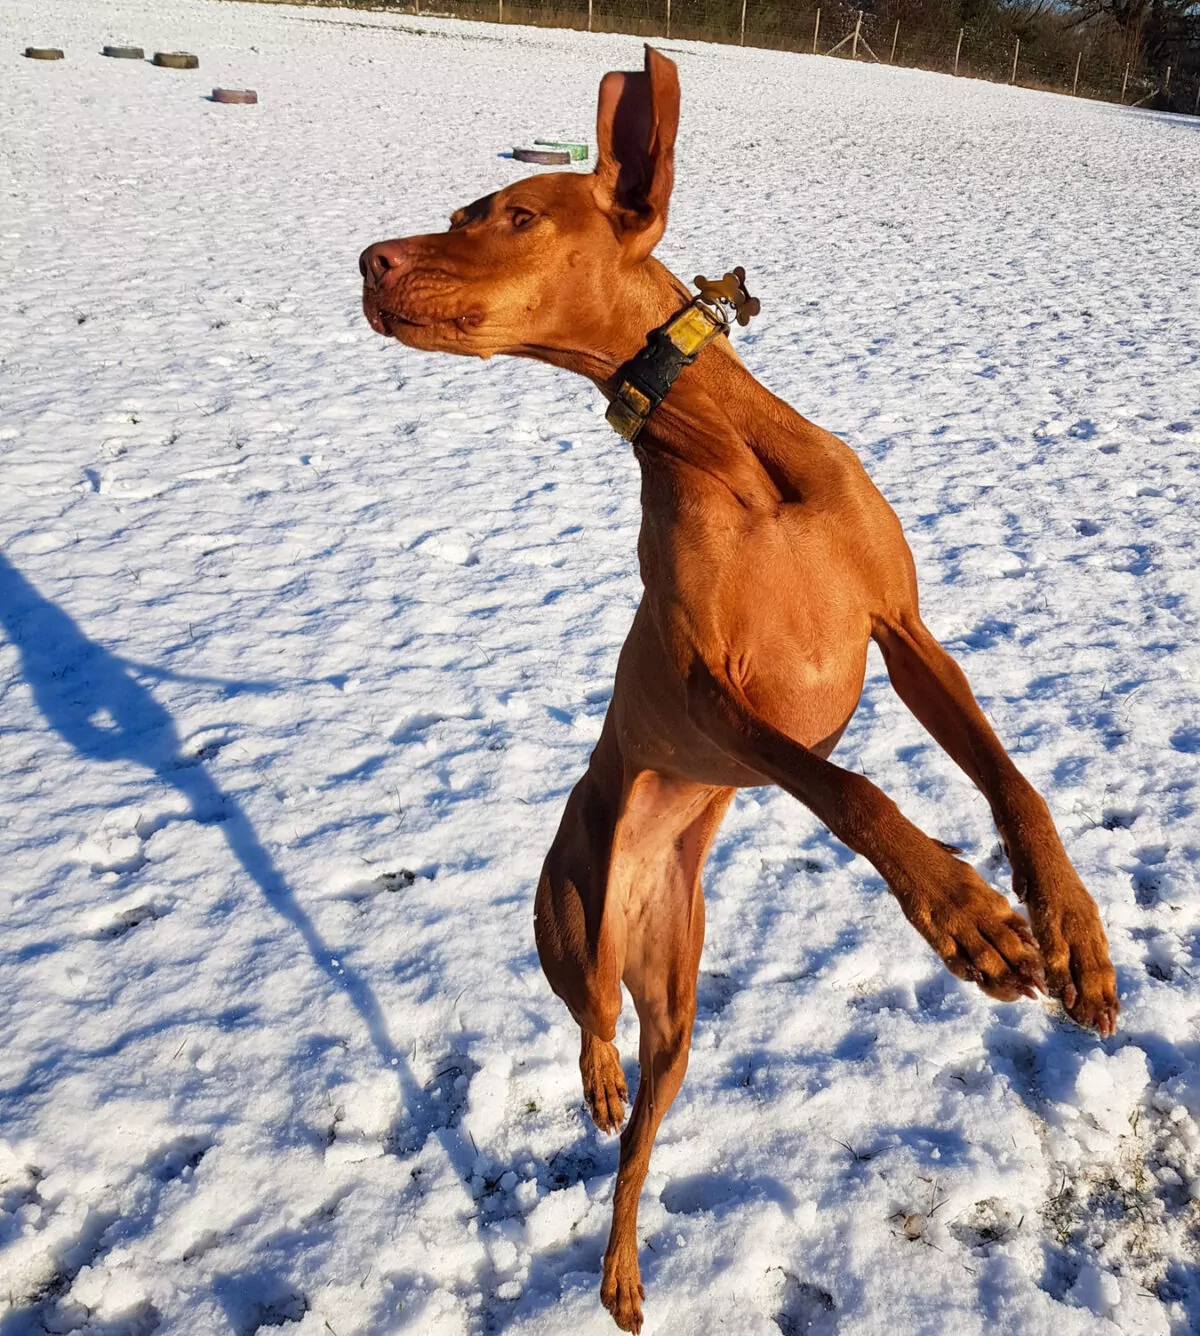 Vizsla caught in the air playing in the snow at doggy day care